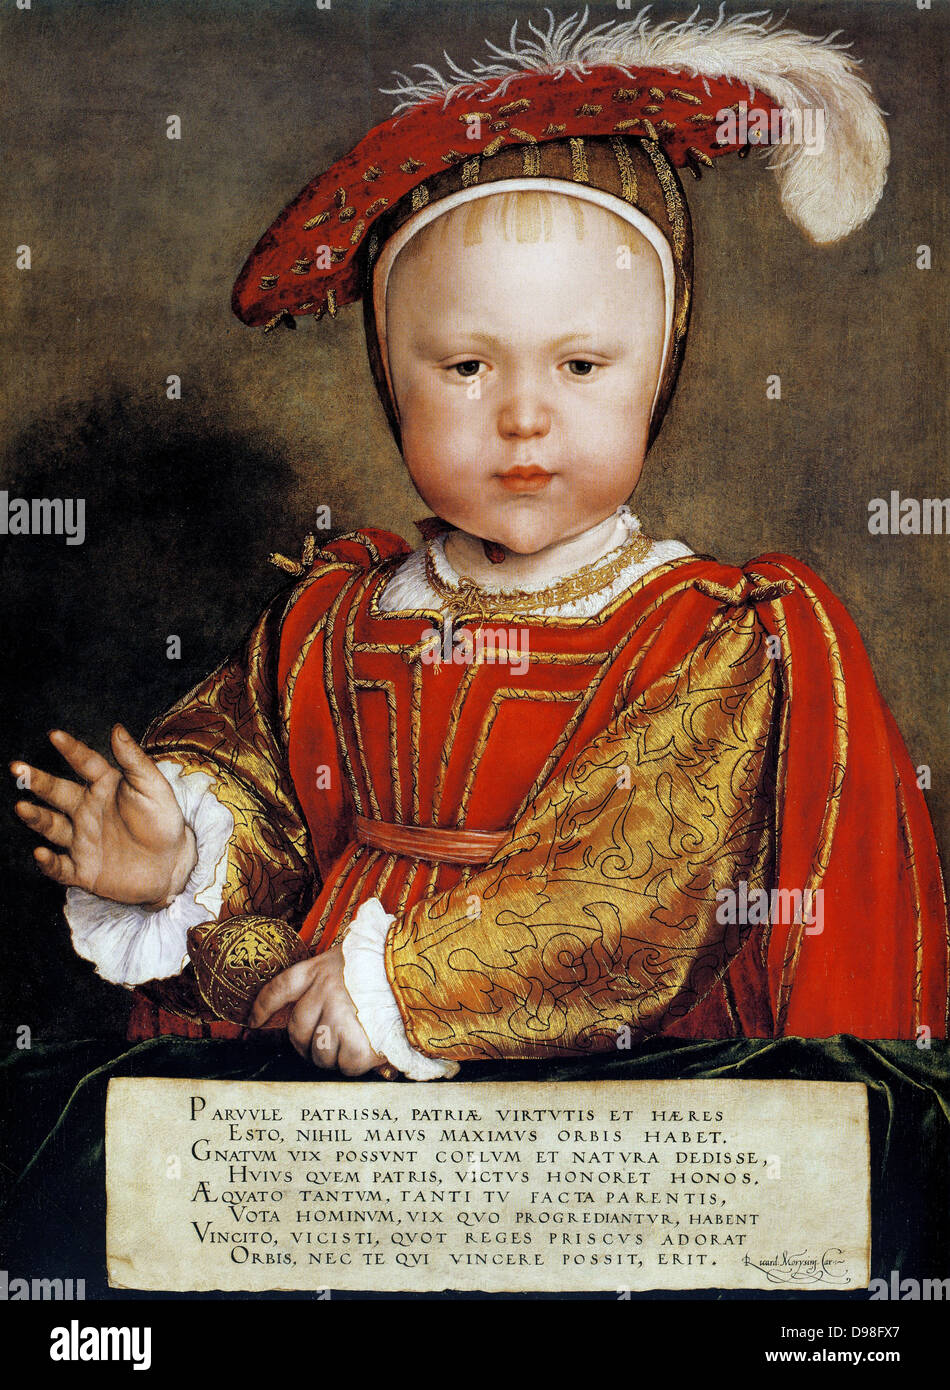 Edward VI (1537-1553) king of England and Ireland from 1547. Son of Henry VIII and his third wife, Jane Seymour. Always a sickly child, he died of natural causes. Portrait by Holbein. Stock Photo